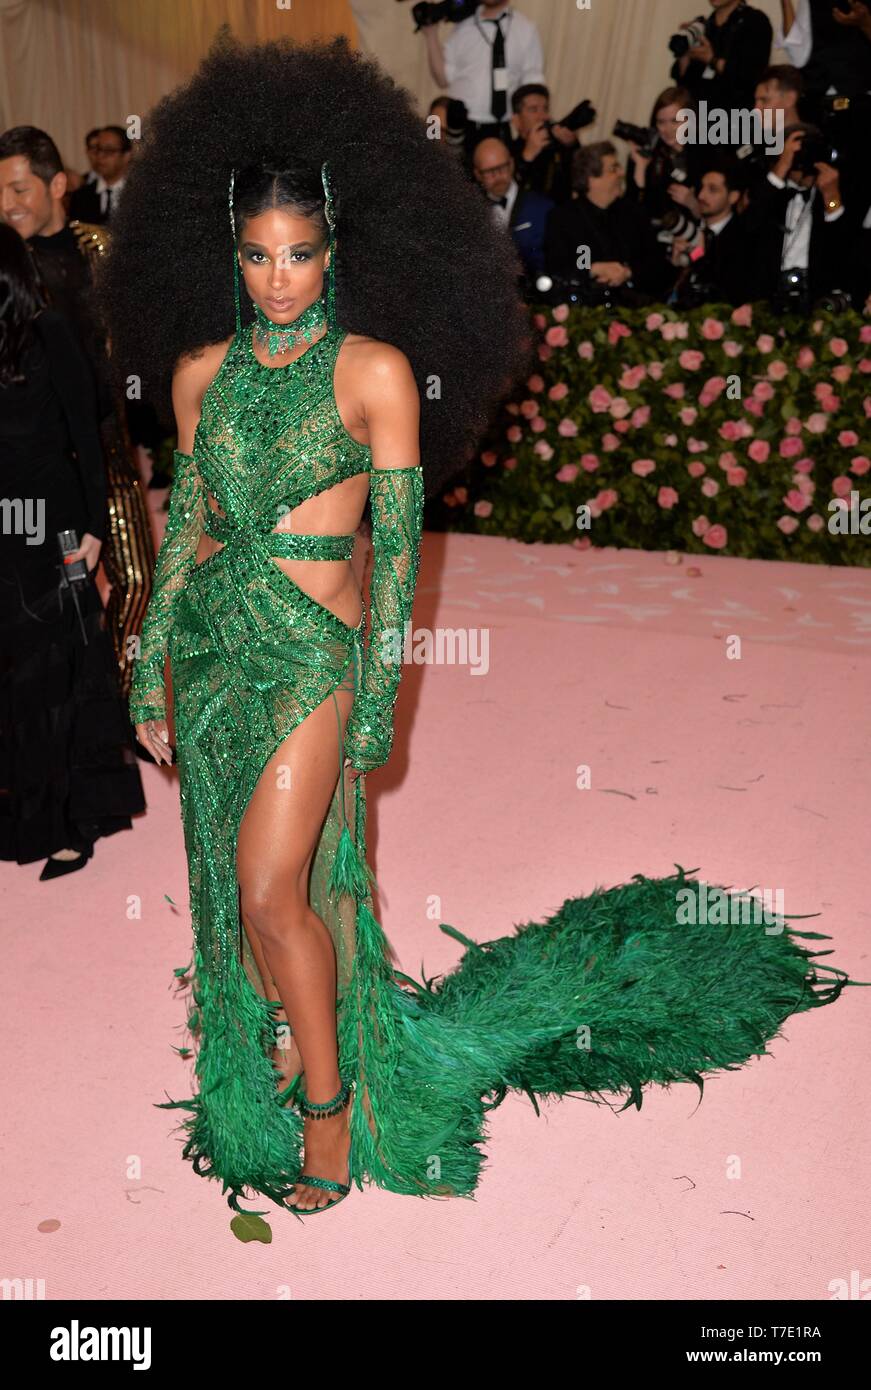 New York, NY, USA. 6th May, 2019. Ciara at arrivals for Camp: Notes on Fashion Met Gala Costume Institute Annual Benefit - Part 3, Metropolitan Museum of Art, New York, NY May 6, 2019. Credit: Everett Collection Inc/Alamy Live News Stock Photo